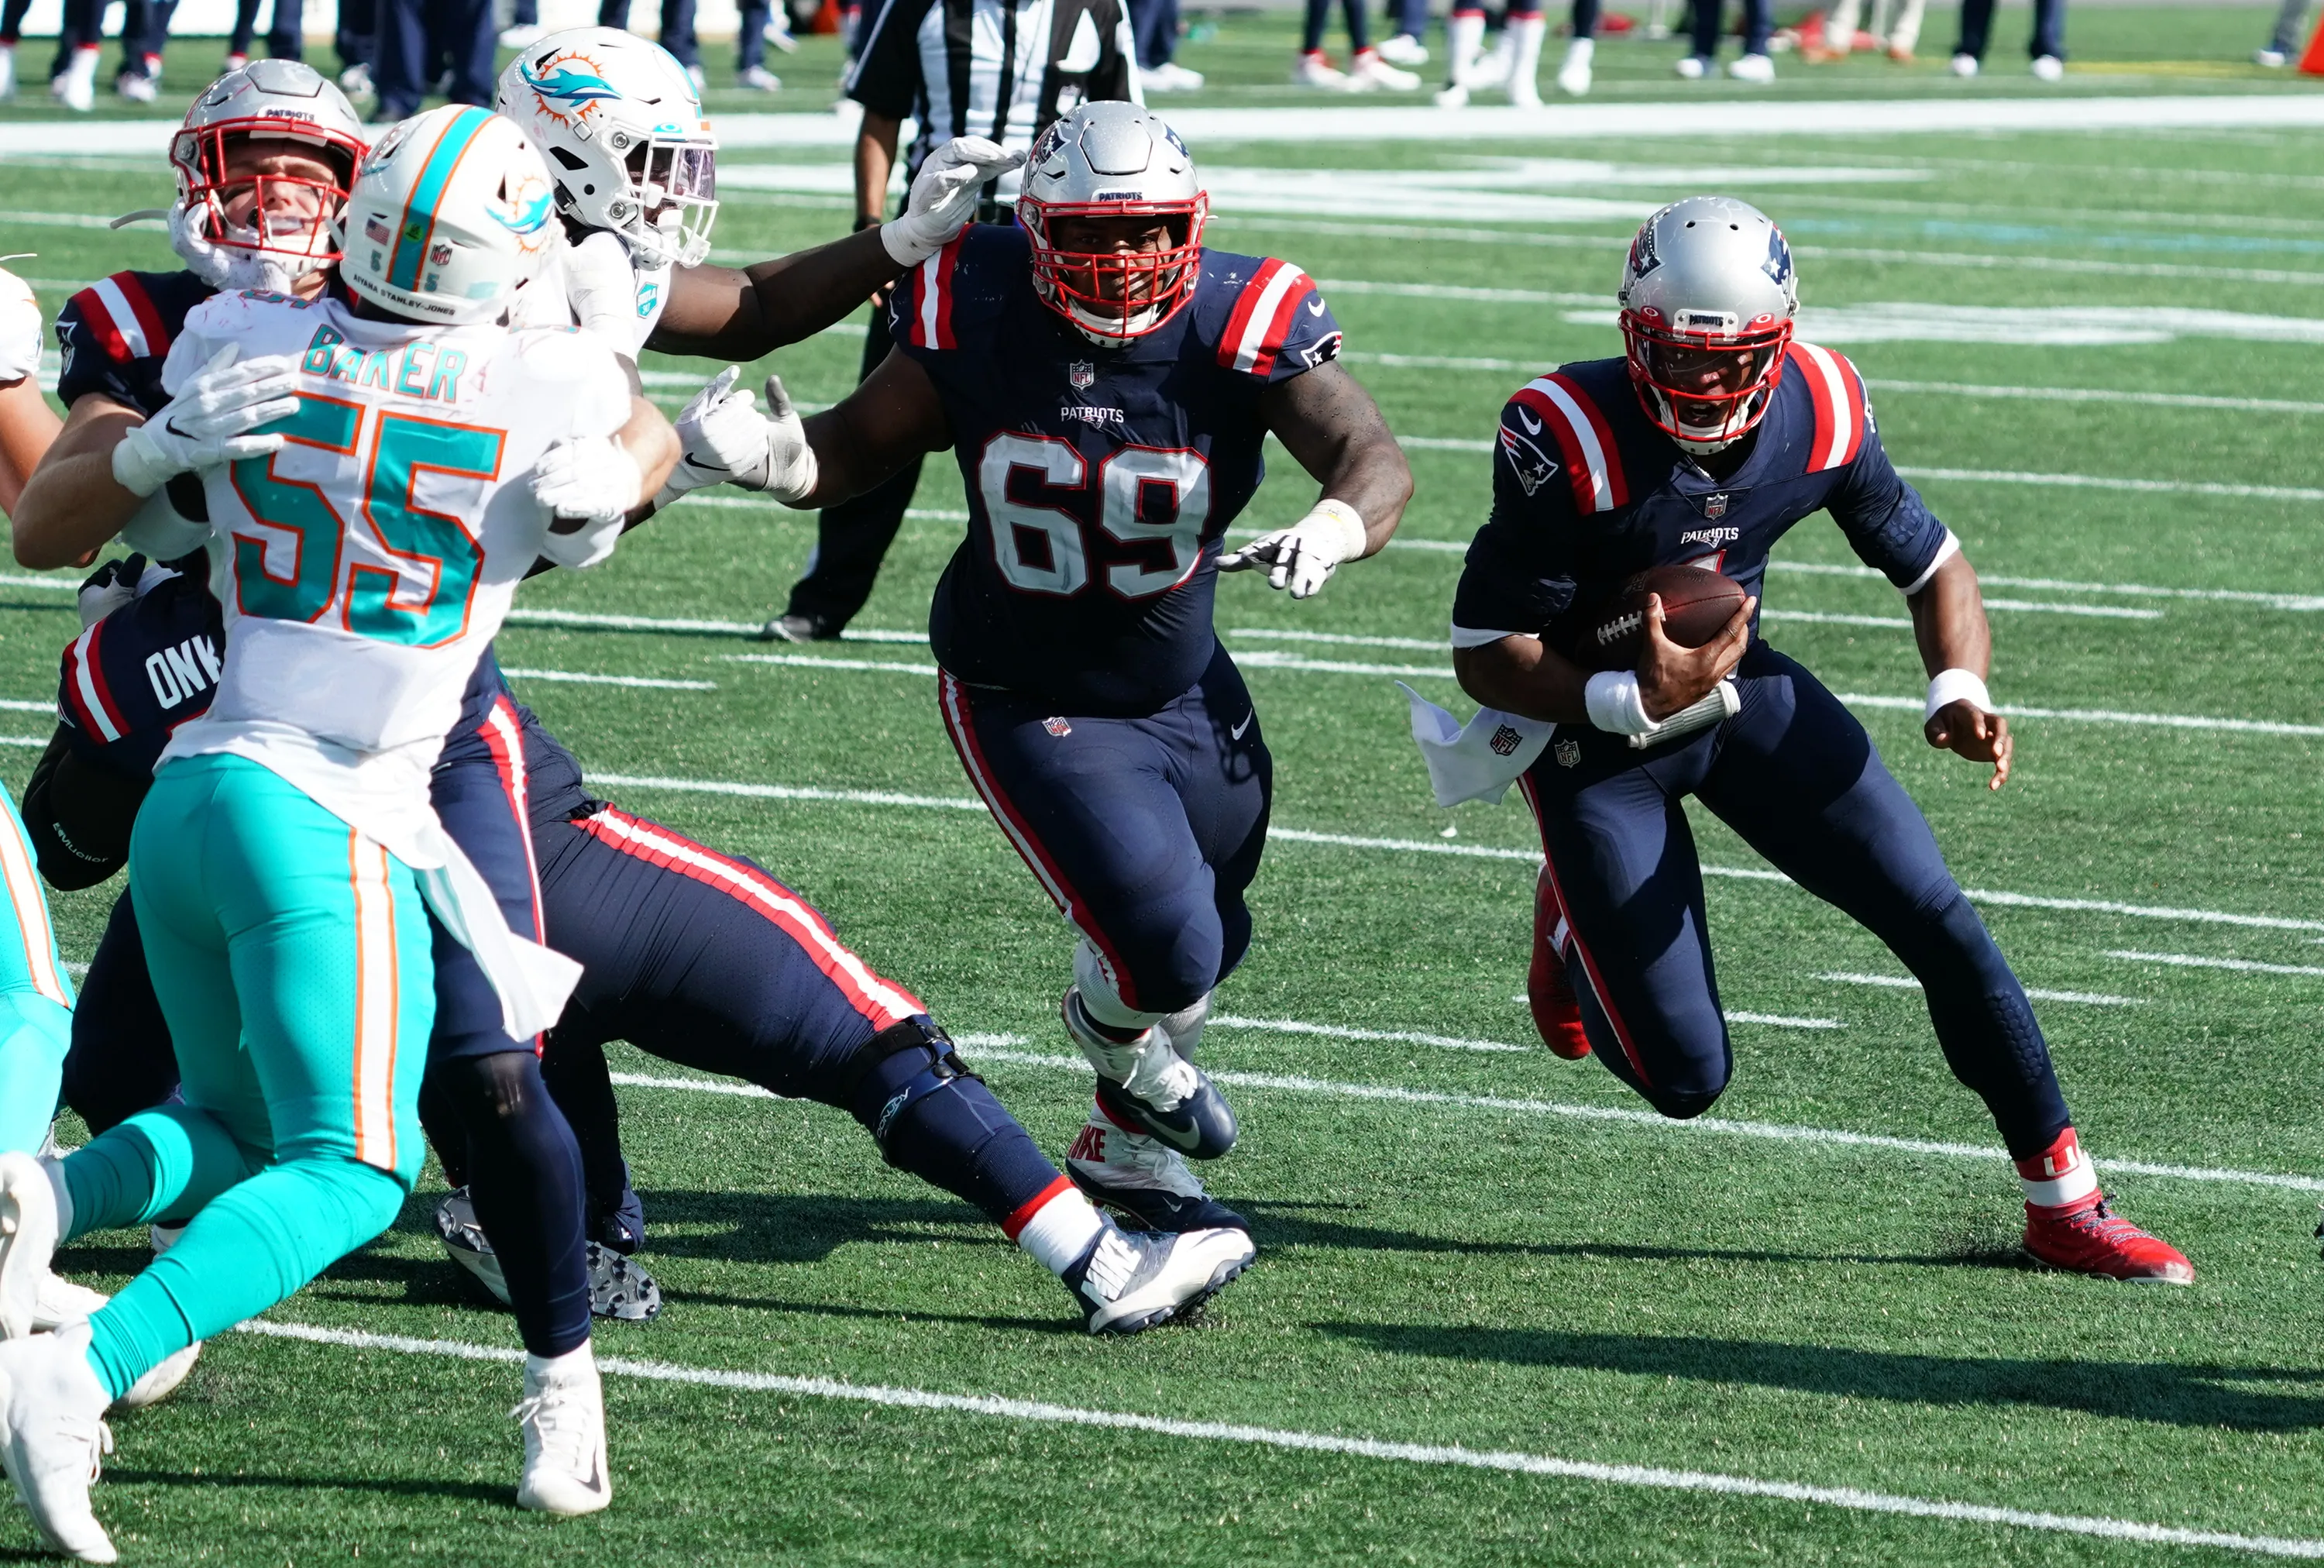 Patriots quarterback Cam Newton got effective blocking from rookie Michael Onwenu (left) on the offensive line. (David Butler II-USA TODAY Sports)